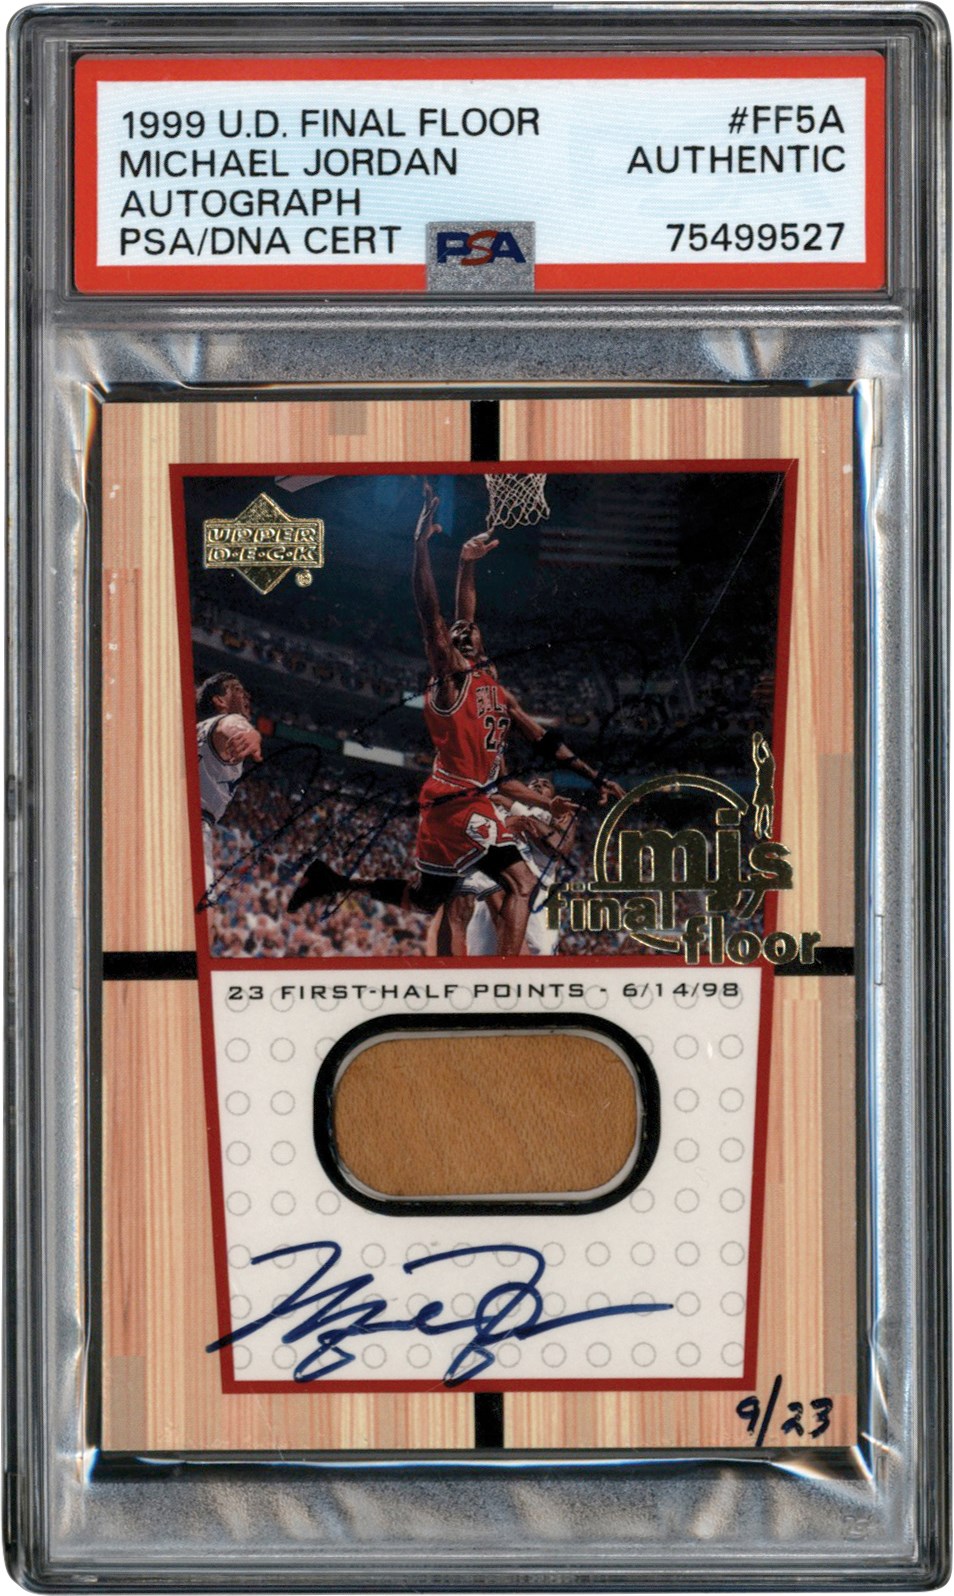 Basketball Cards - Only Known 1999-2000 Upper Deck MJ's Final Floor #FF5A Michael Jordan TWICE Signed Game Used Floor Autograph Card #9/23 PSA Authentic